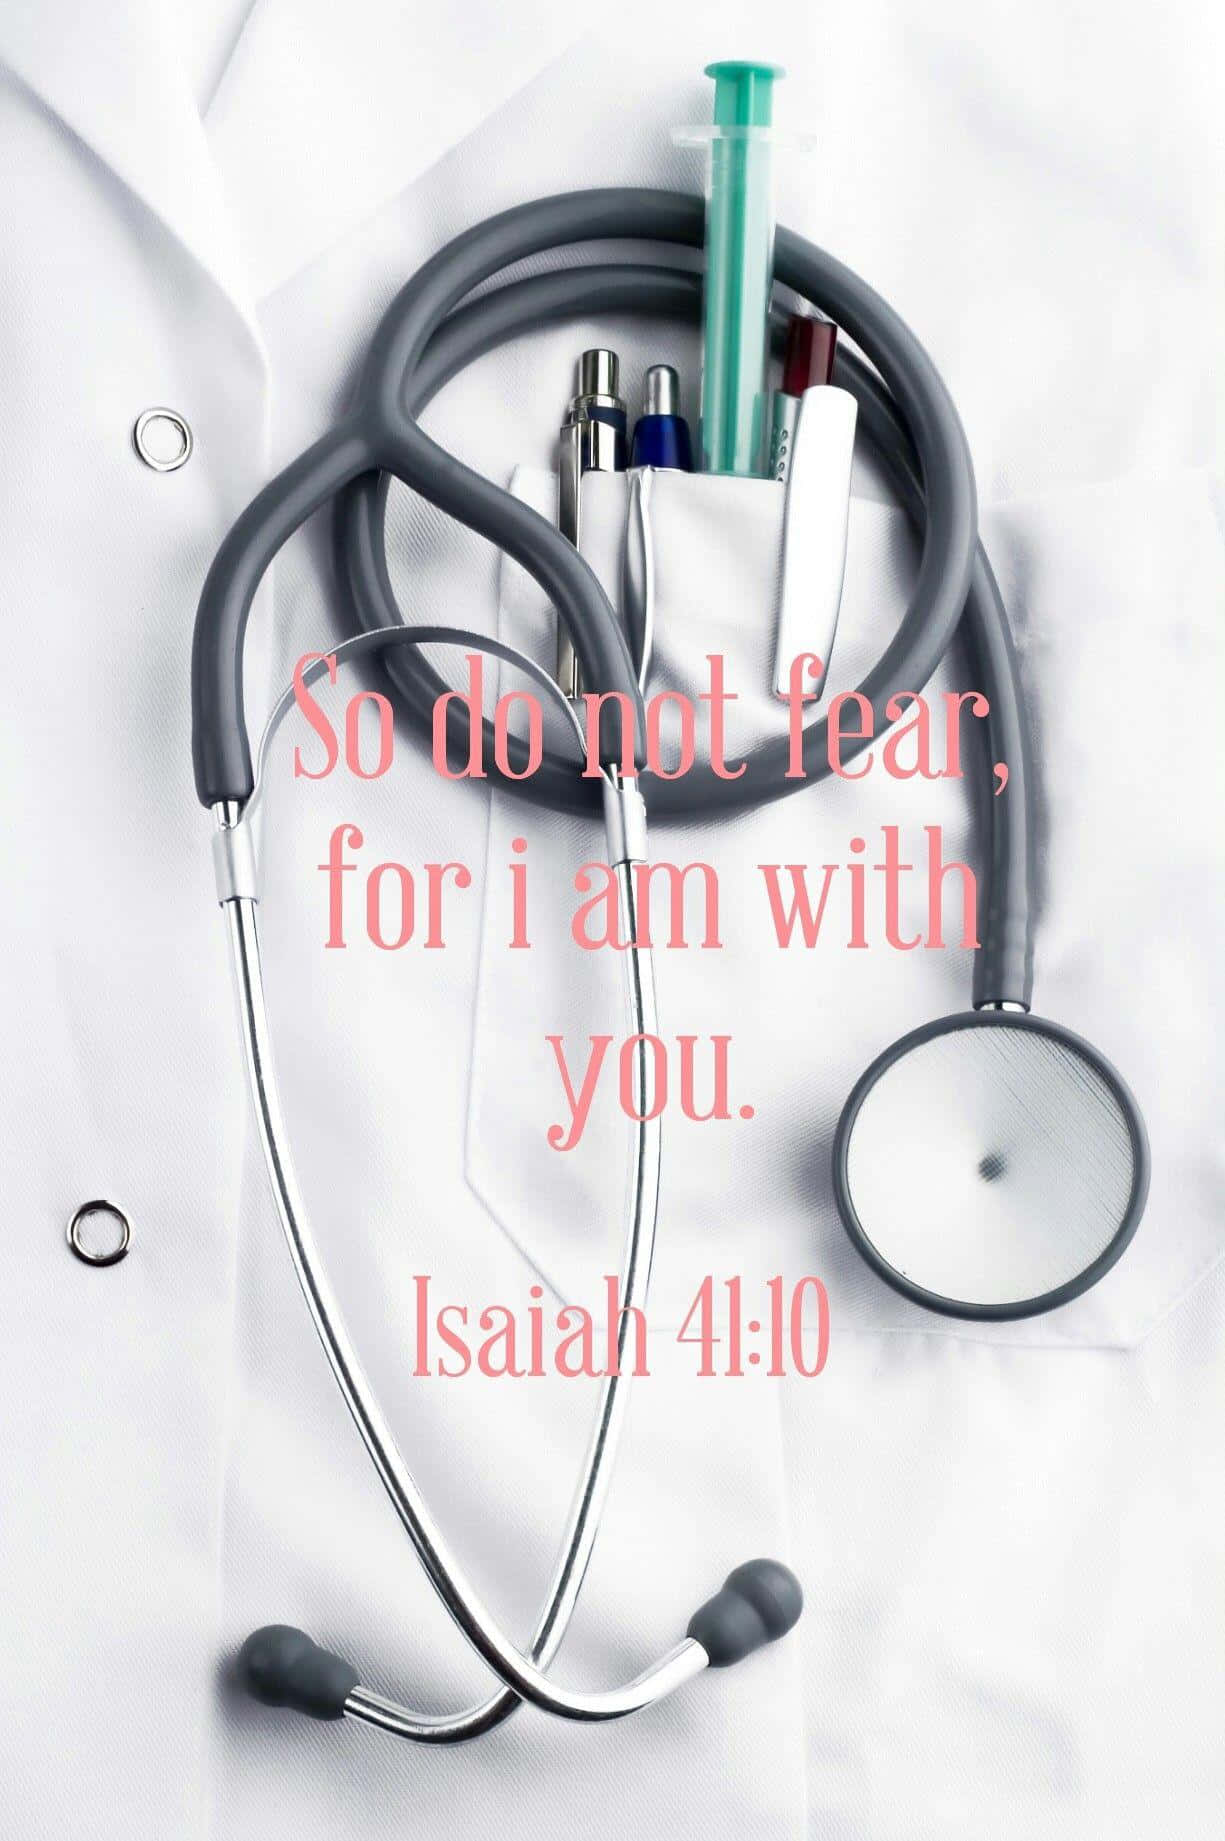 A Stethoscope And A Stethoscope With The Words So Do Not Fear For I Am With You